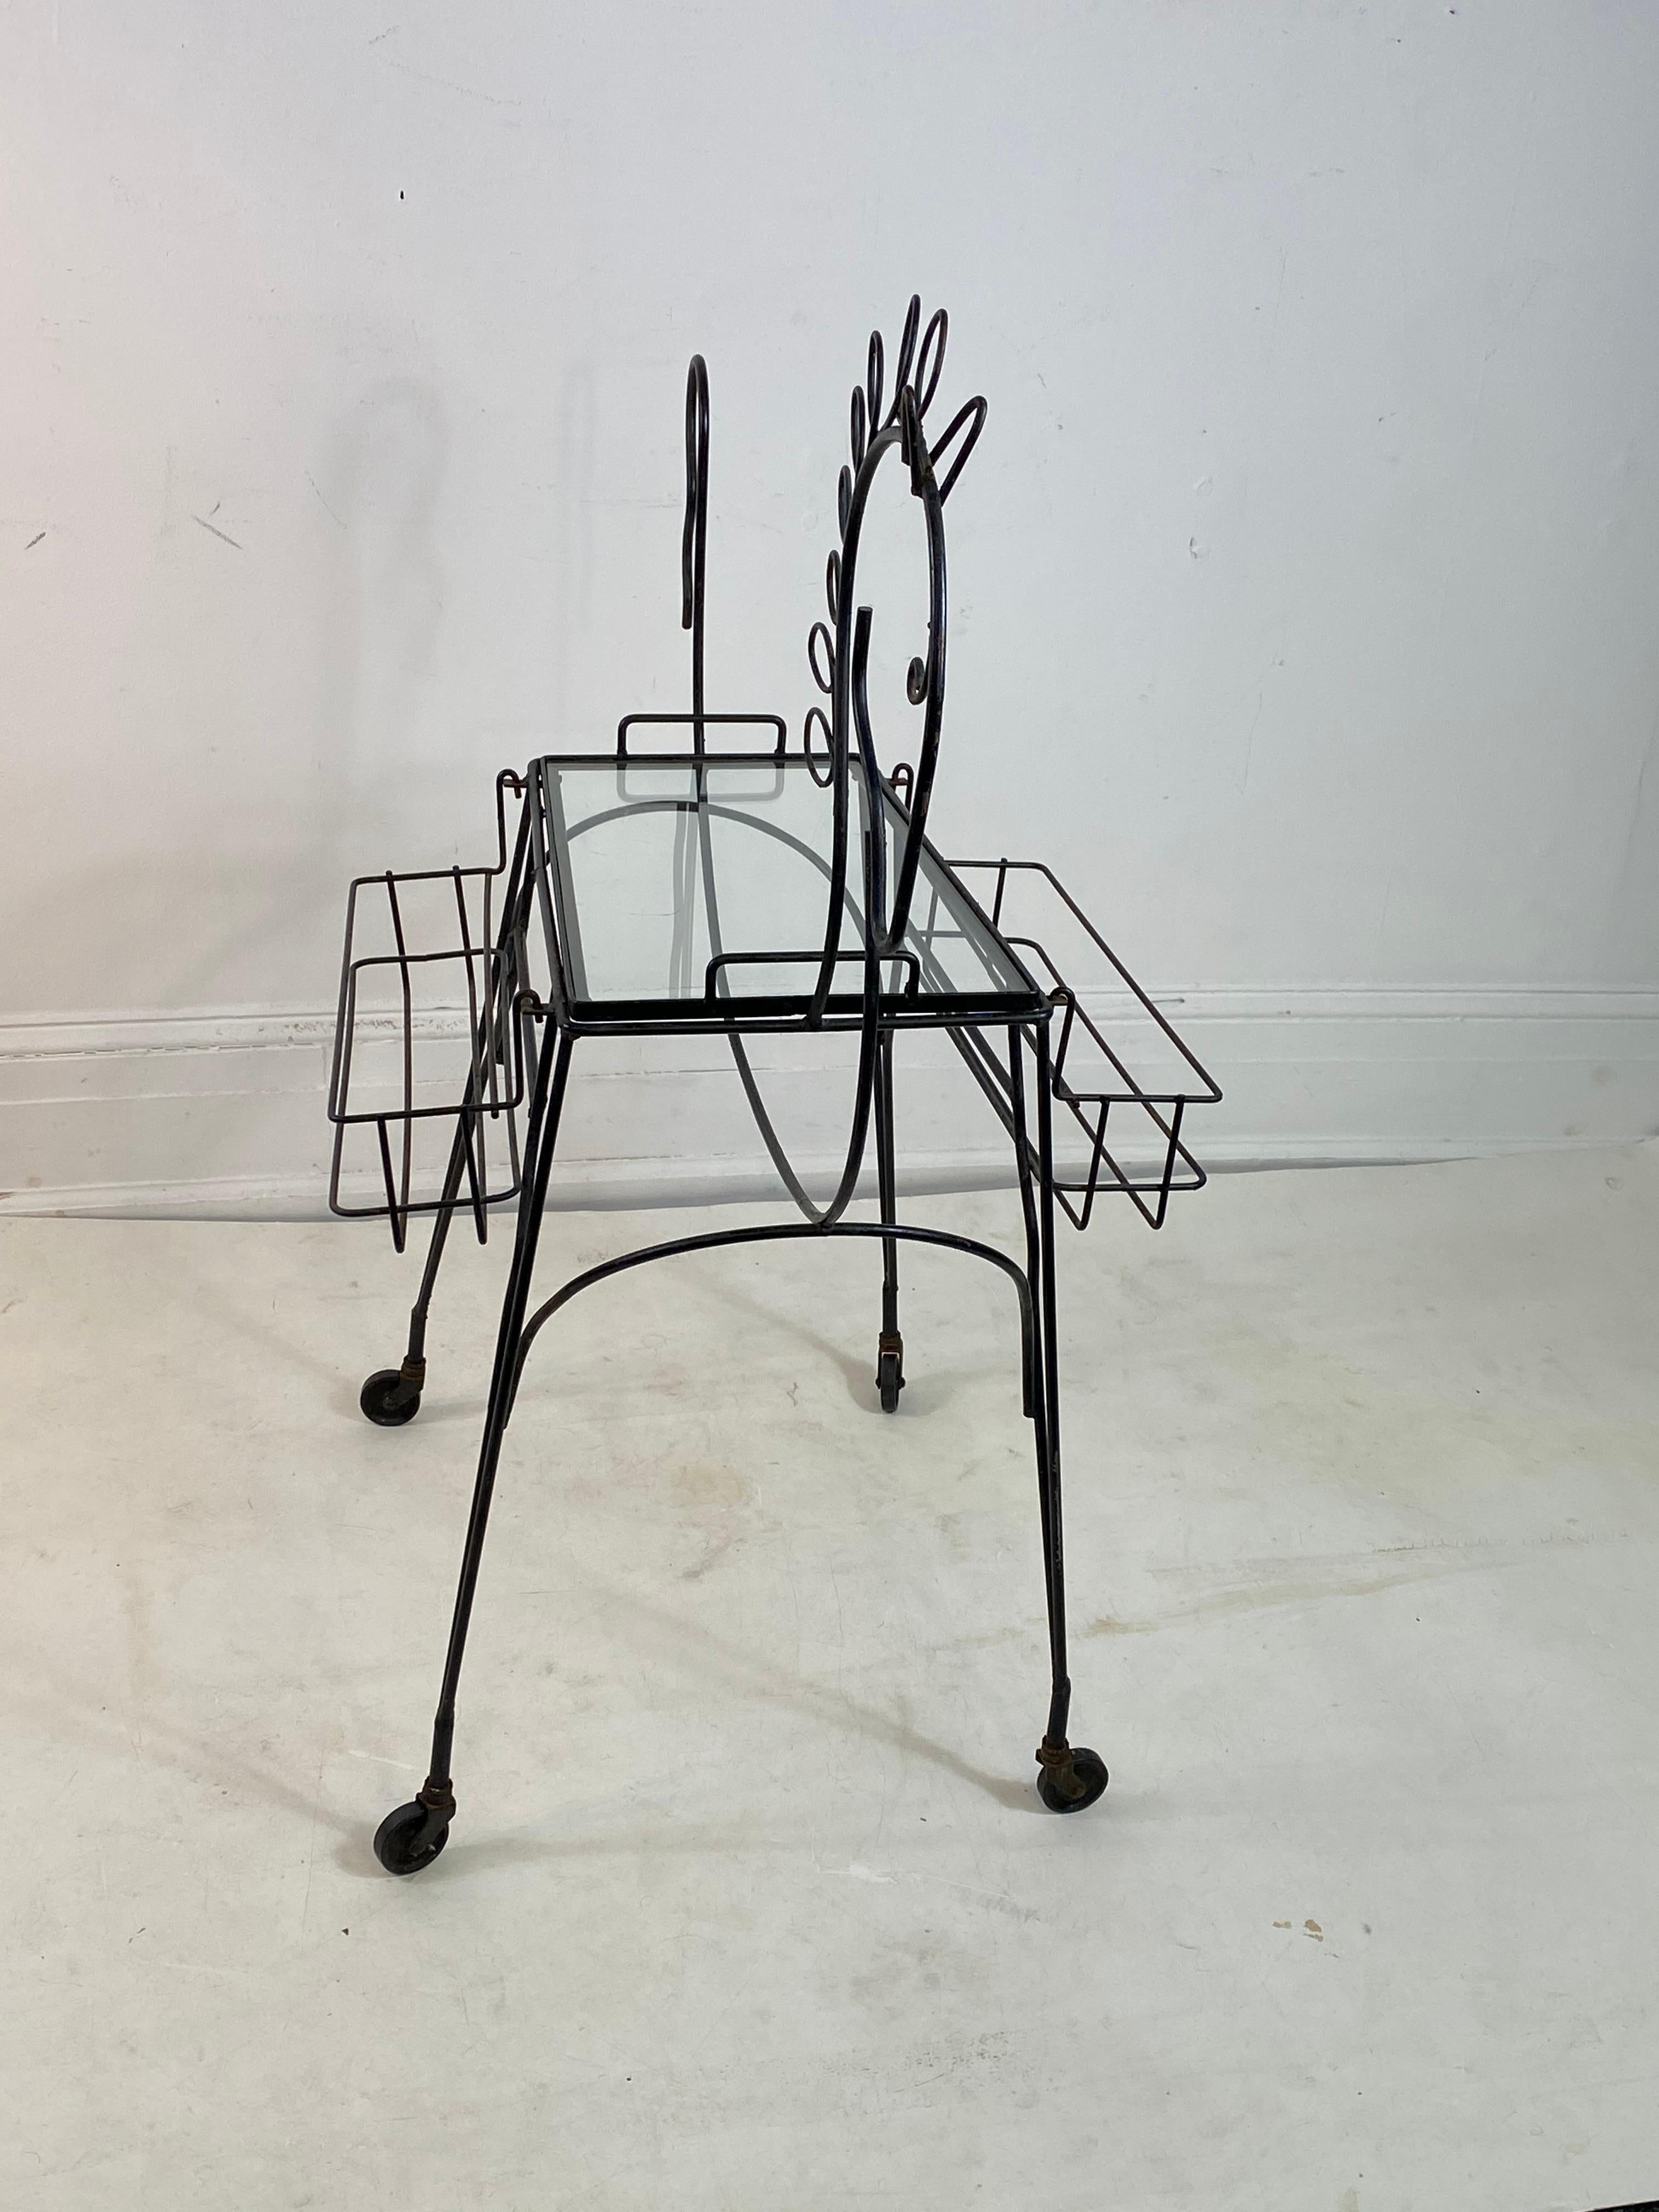 Whimsical midcentury black horse outline bare cart designed by Frederick Weinberg in the 1950s. Glass top center table with two bottle racks on each side. Designed with a black enameled metal frame depicting the stylistic horse. Mounted on wheels